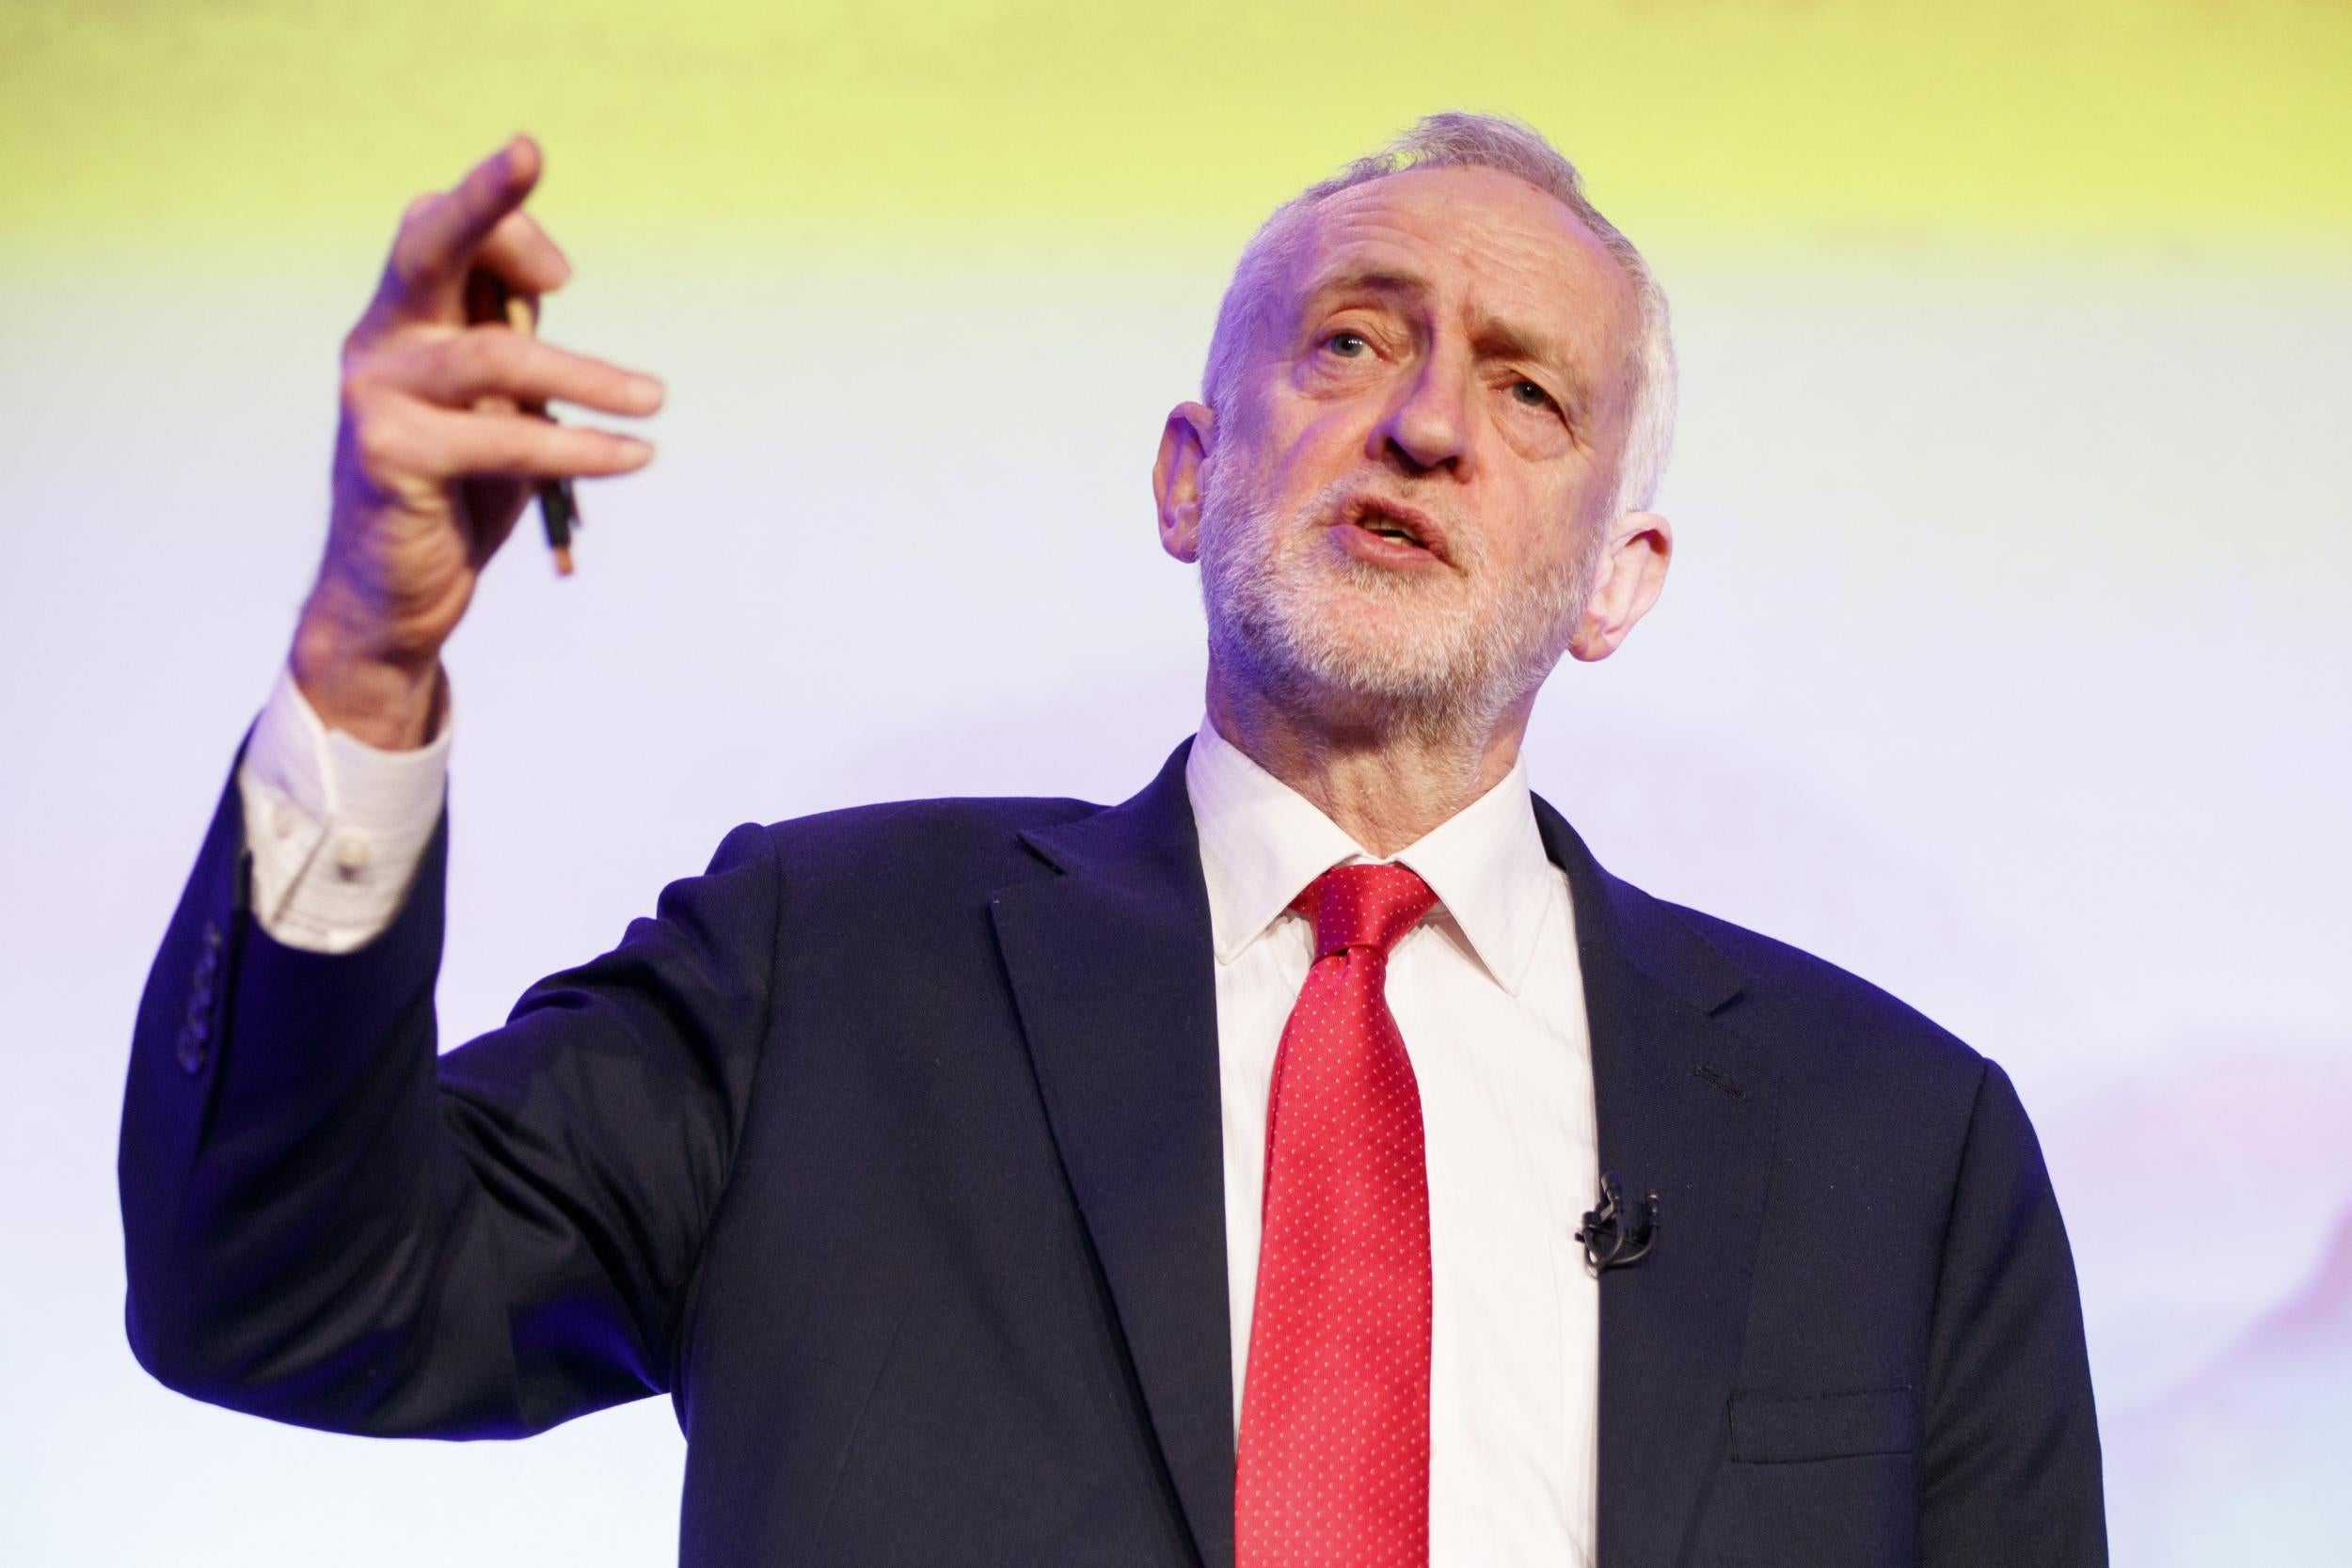 The Labour leader will make a major speech on Monday outlining his party’s Brexit approach